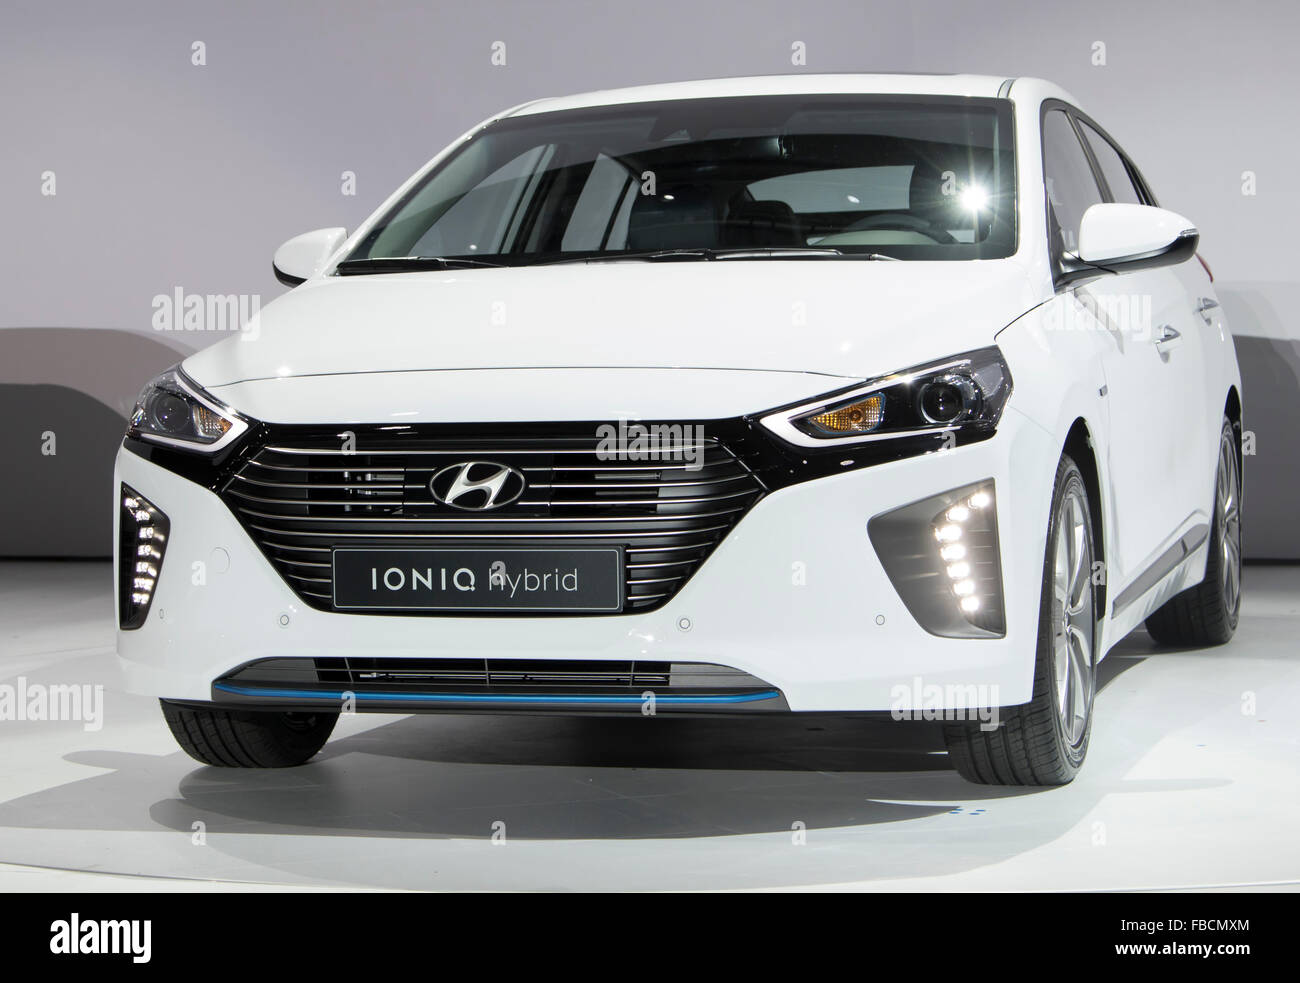 Ioniq Hybrid, Jan 14, 2016 : Hyundai Motor's Ioniq hybrid is seen during a press conference in Seoul, South Korea. The green car's prices range from 22.95 million won (US$18,982) to 27.55 million won. Hyundai Motor said the Ioniq has higher fuel efficiency and its prices is cheaper than the Prius made by Japanese carmaker Toyota. Hyundai aims to sell about 30,000 units of the Ioniq this year, local media reported. © Lee Jae-Won/AFLO/Alamy Live News Stock Photo